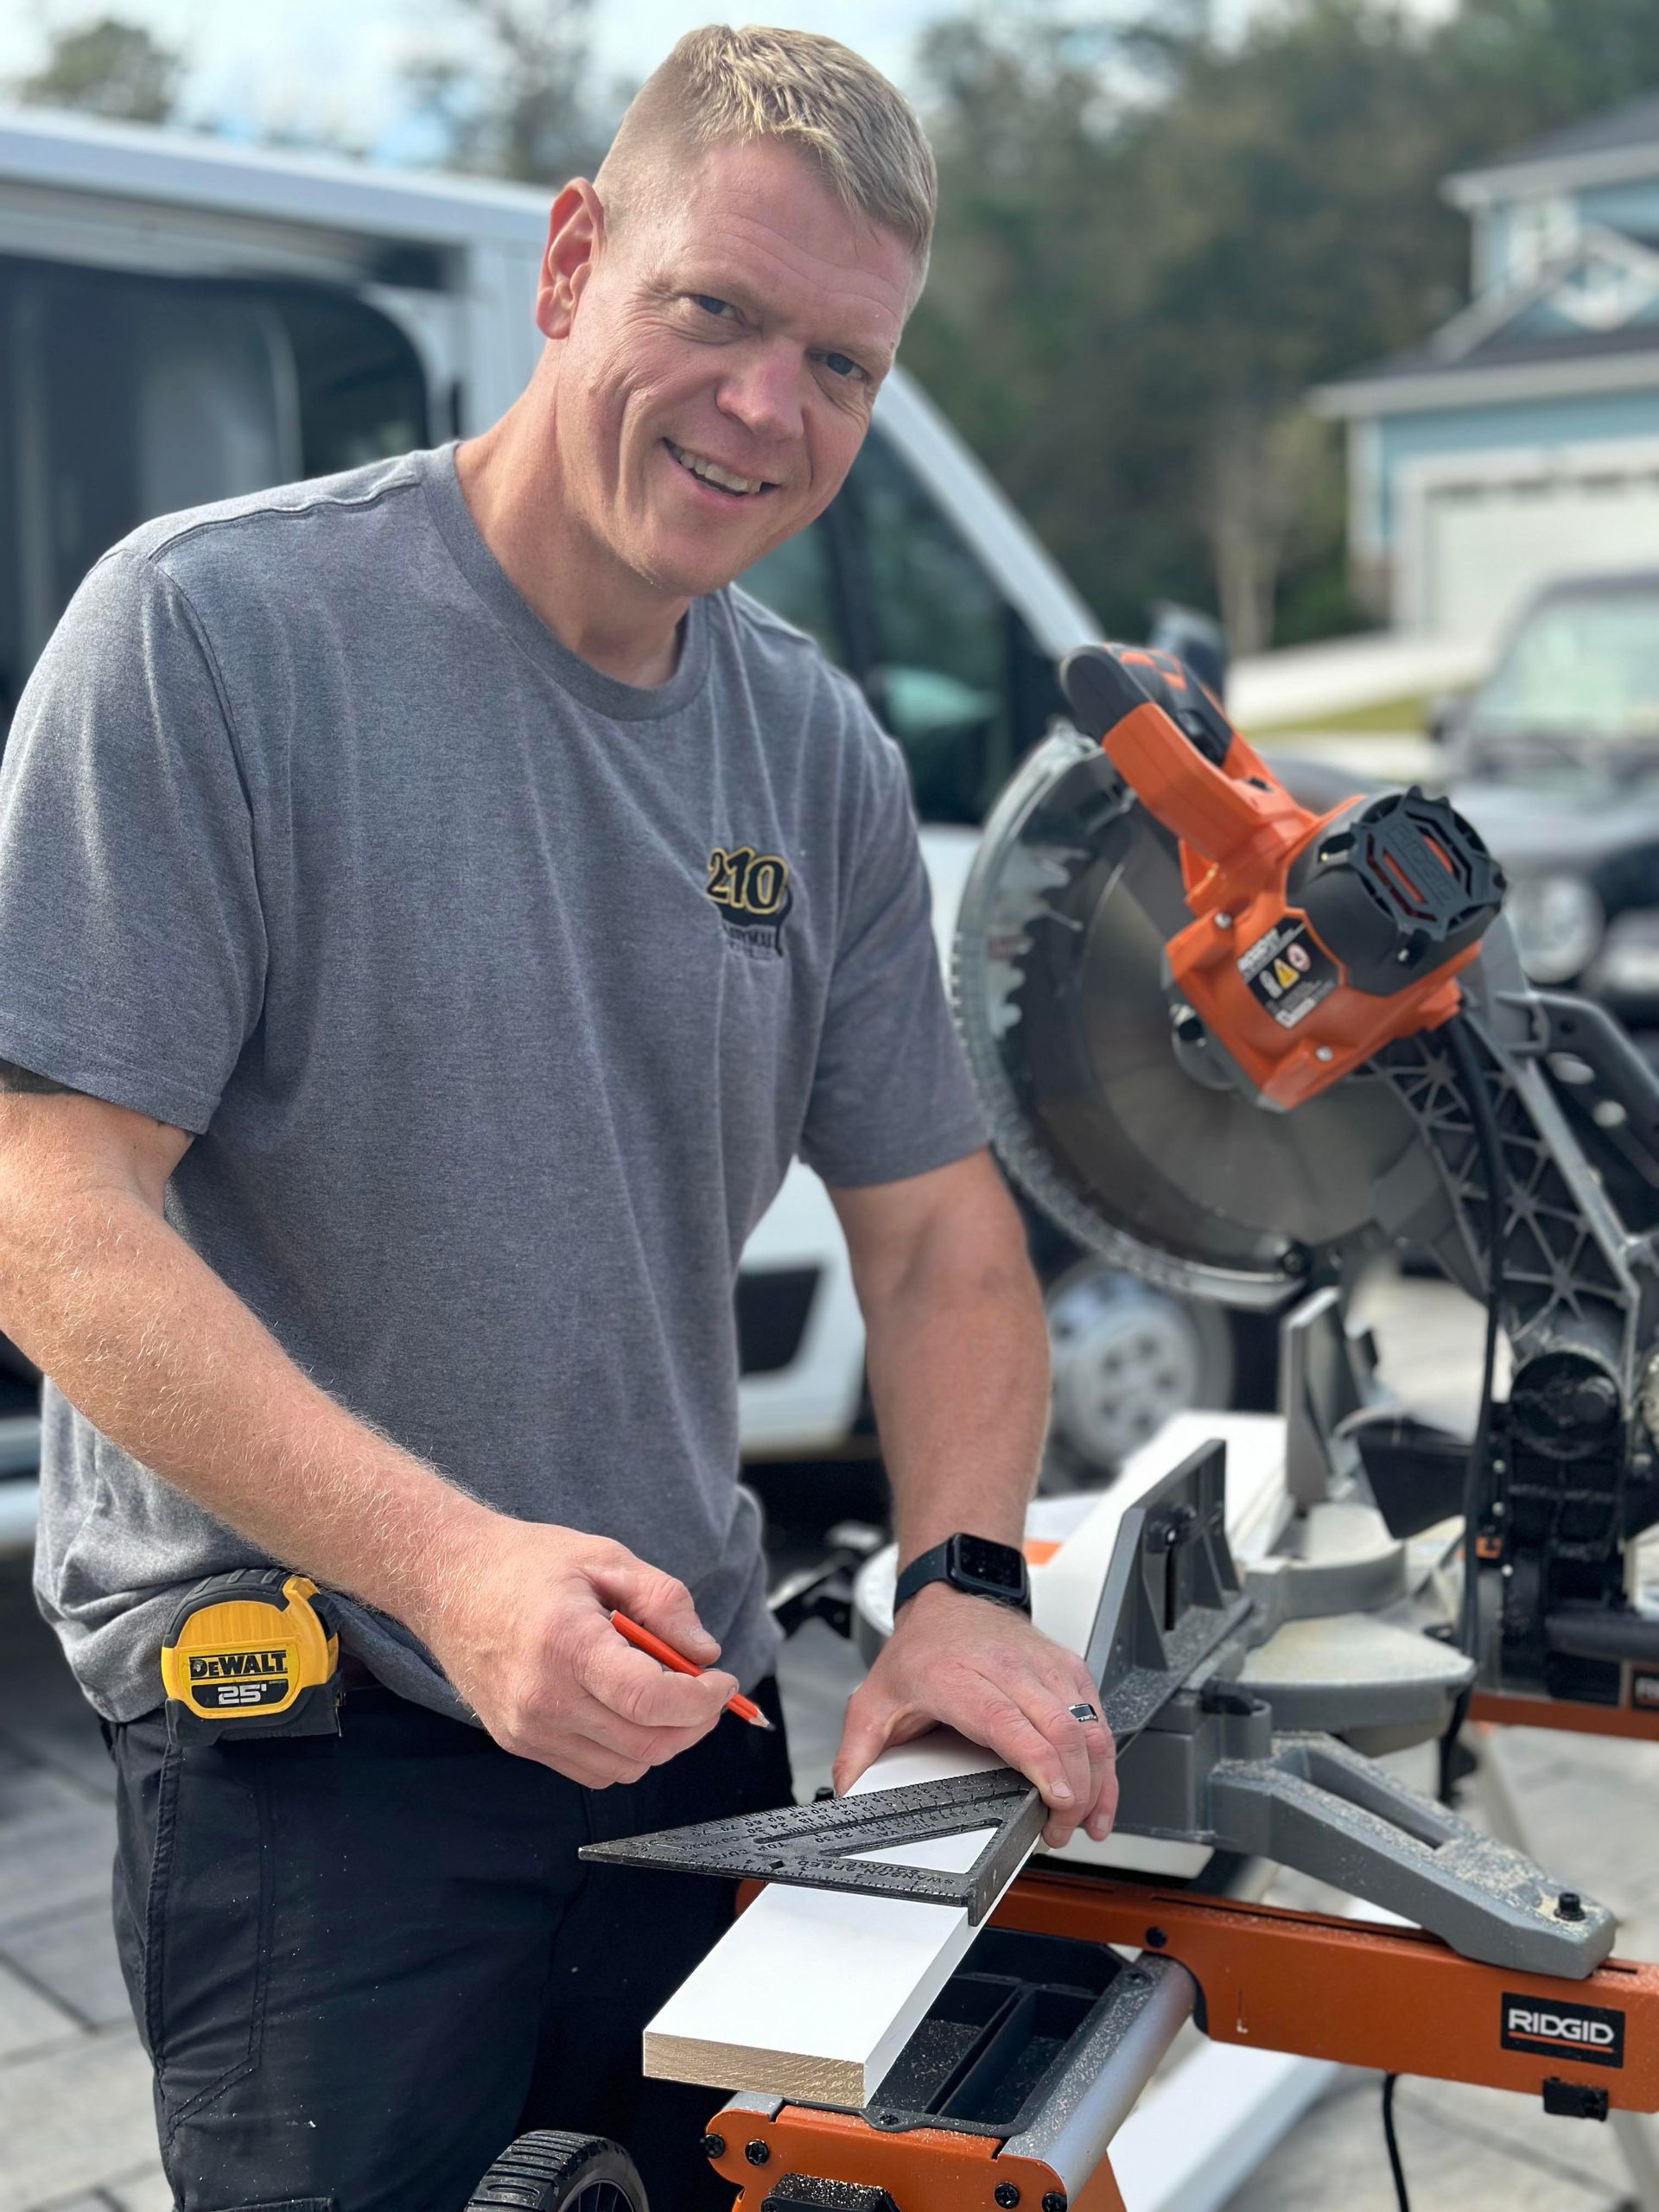 Paul Stratton  is standing next to a circular saw cutting a piece of wood.